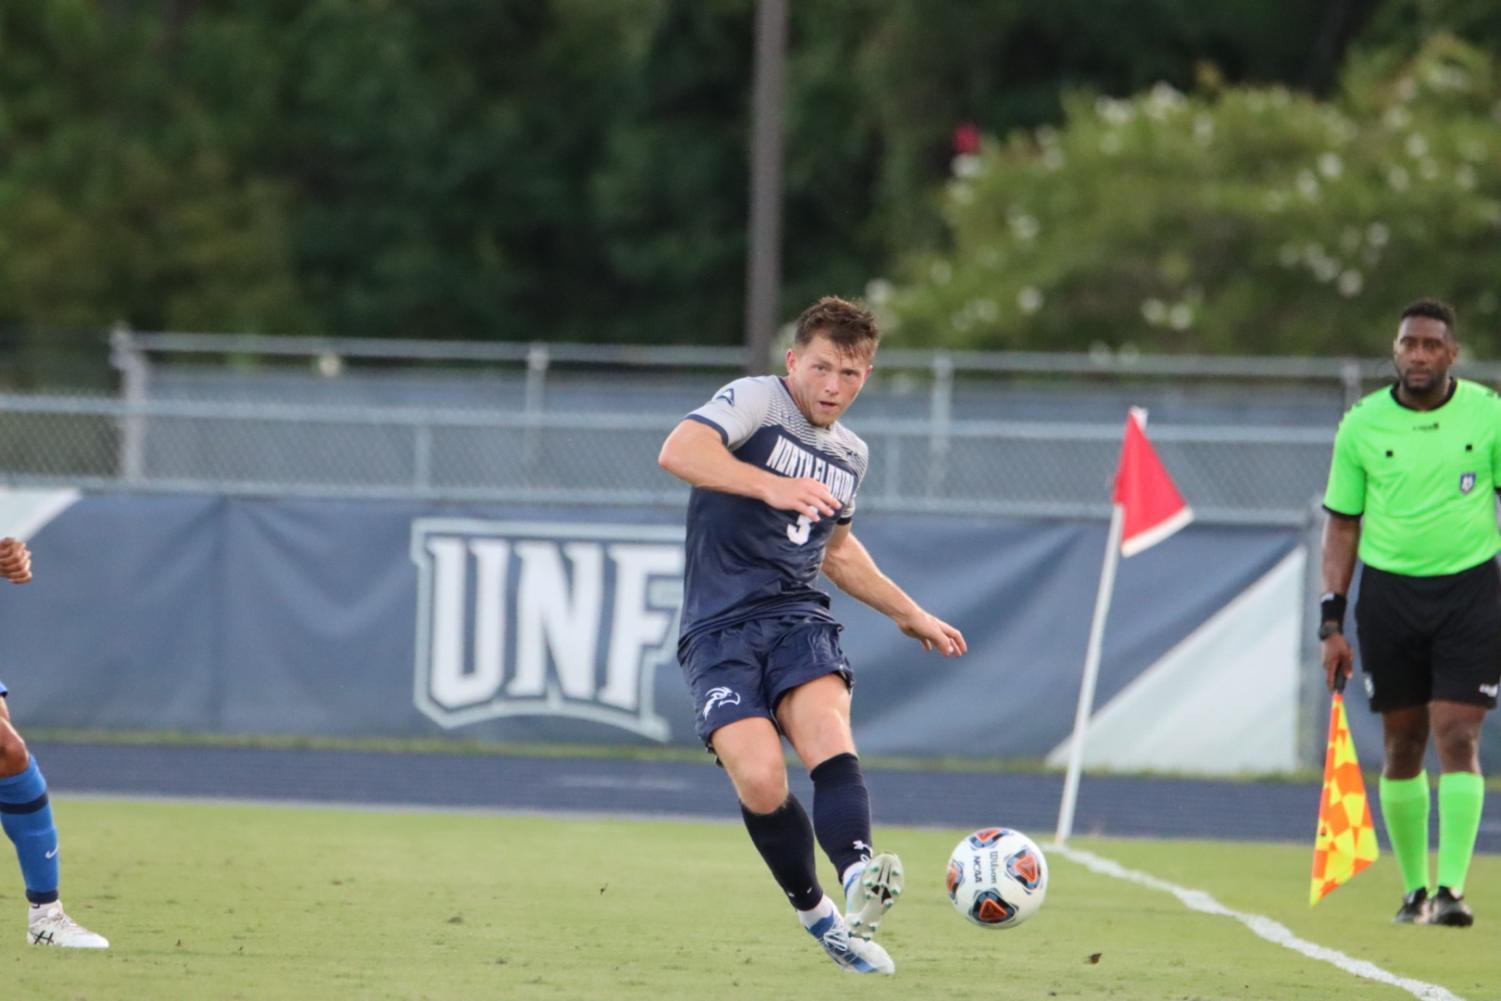 UNF soccer player works the touchline before booting the ball away.